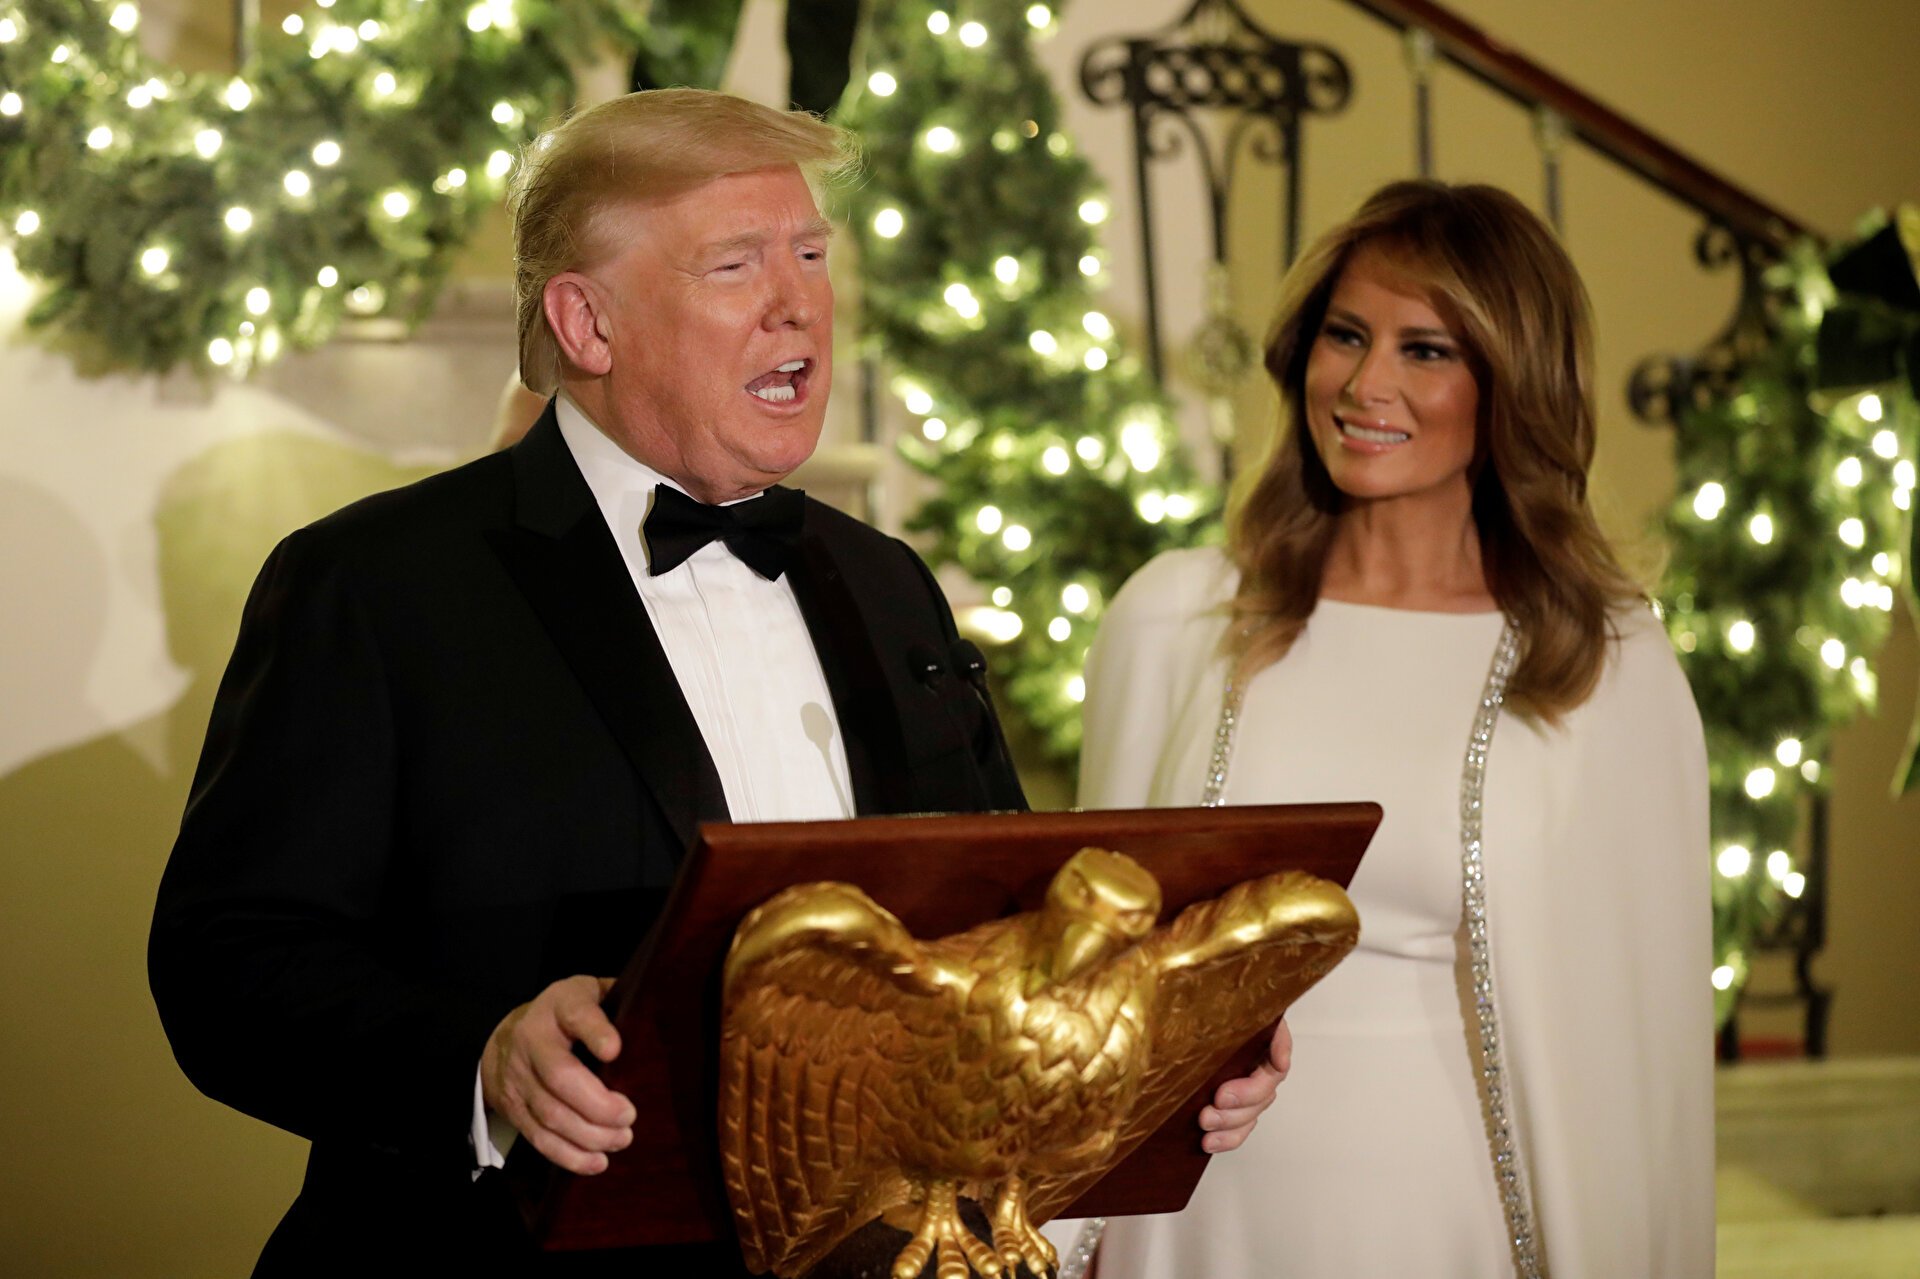 US President Donald Trump and First Lady Melania Trump at the Congressional Ball in Washington